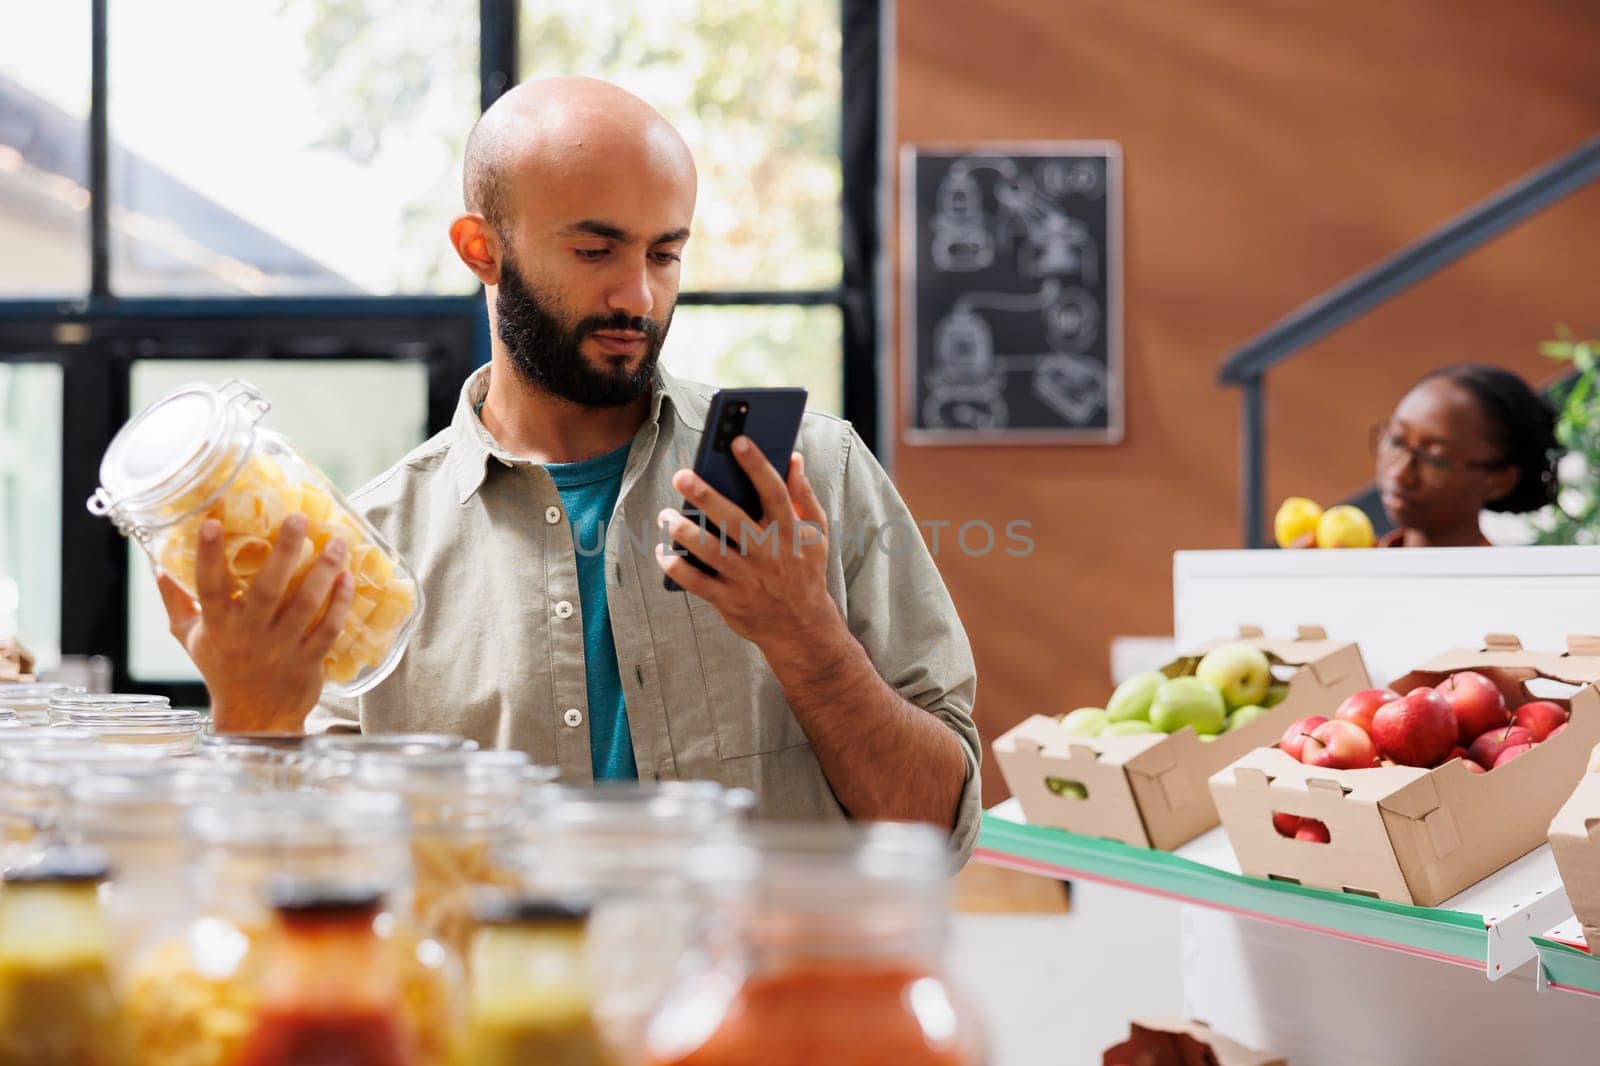 Bearded man in closeup using smartphone to search for recipes and prices at nearby eco friendly shop. Middle eastern shopper browsing on internet for advice on sustainable healthy living.